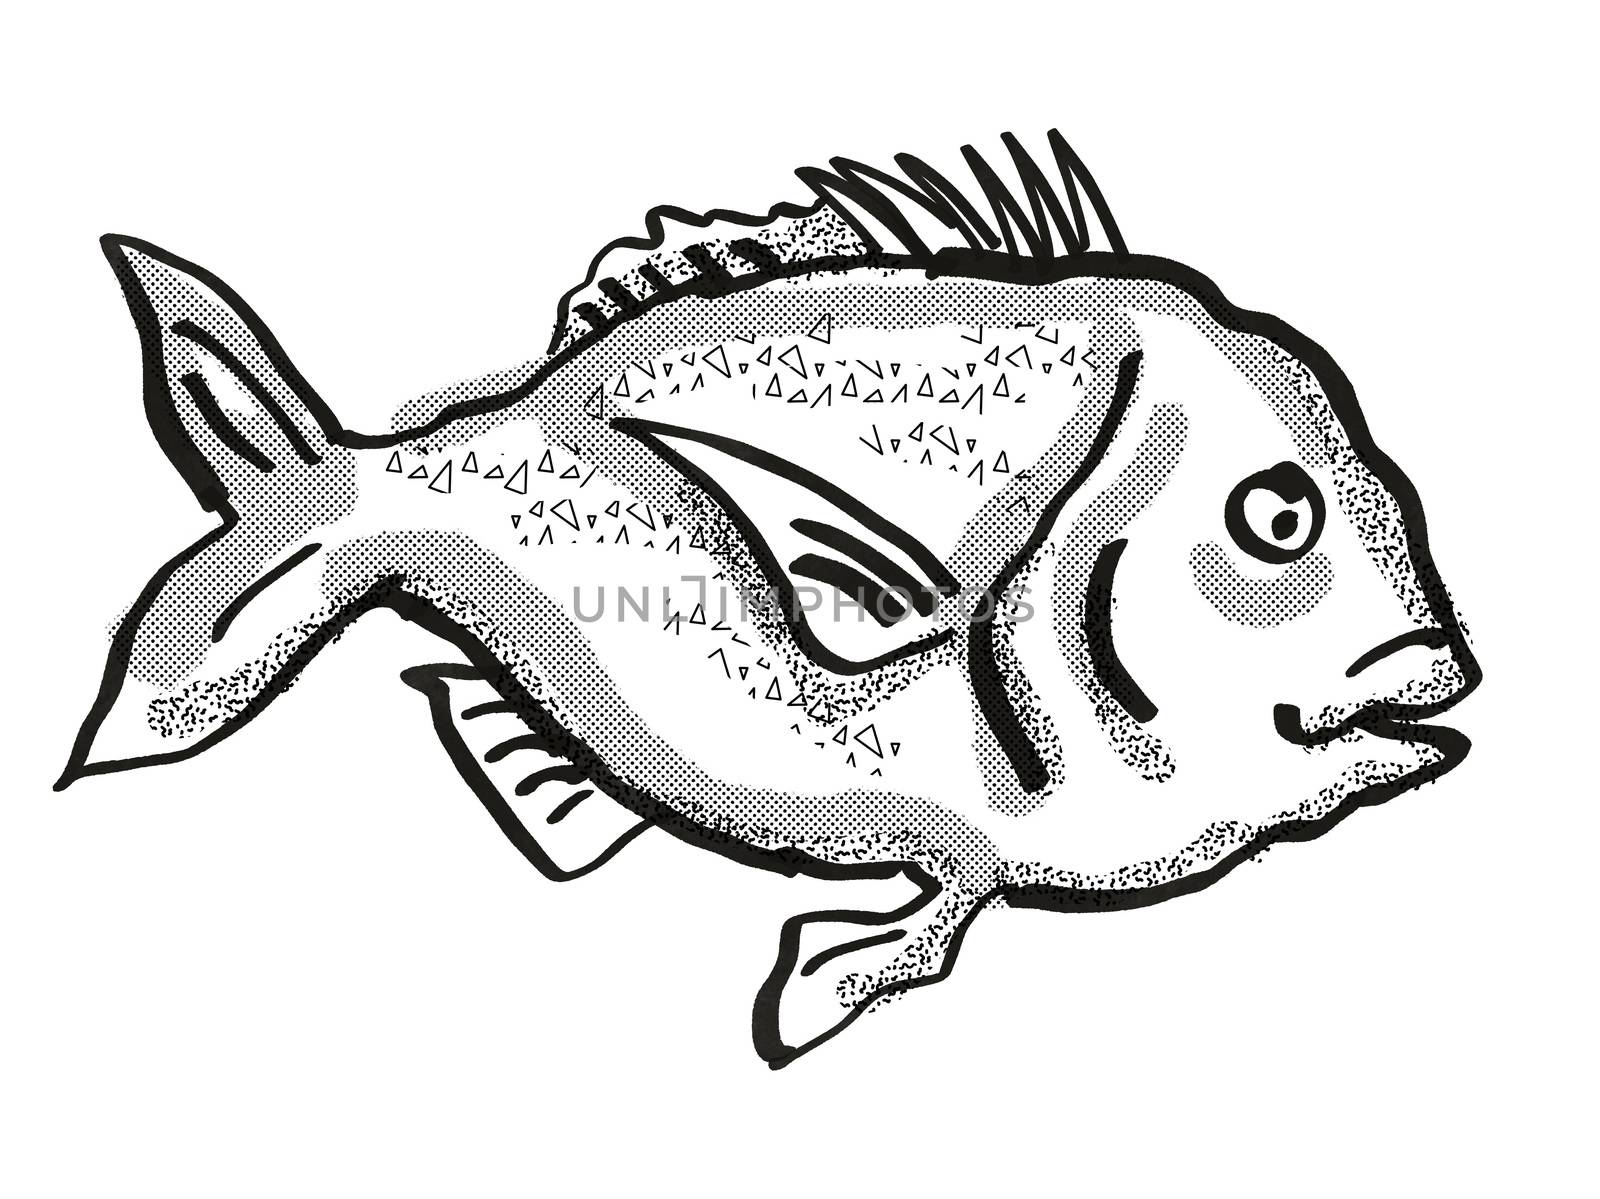 Retro cartoon style drawing of a snapper fish, a native New Zealand marine life species viewed from side on isolated white background done in black and white